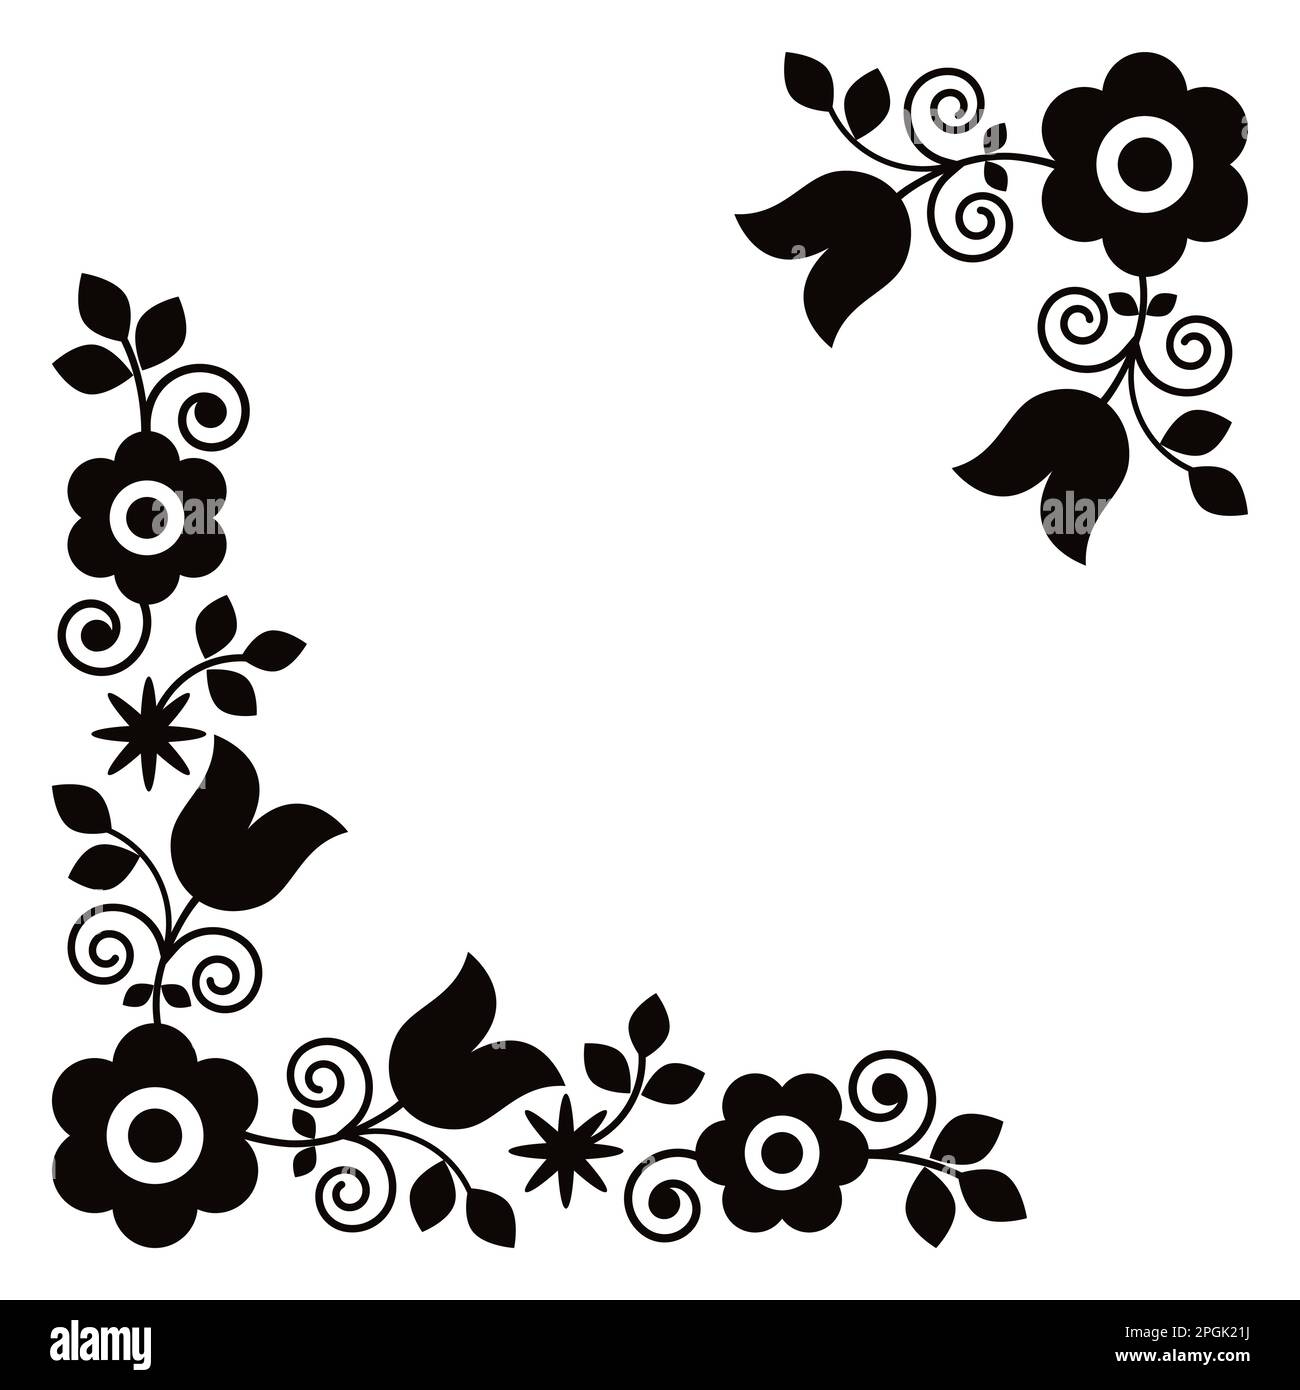 Polish traditional folk art vector corner black and white design set with flowers perfect for greeting card or wedding invitation Stock Vector